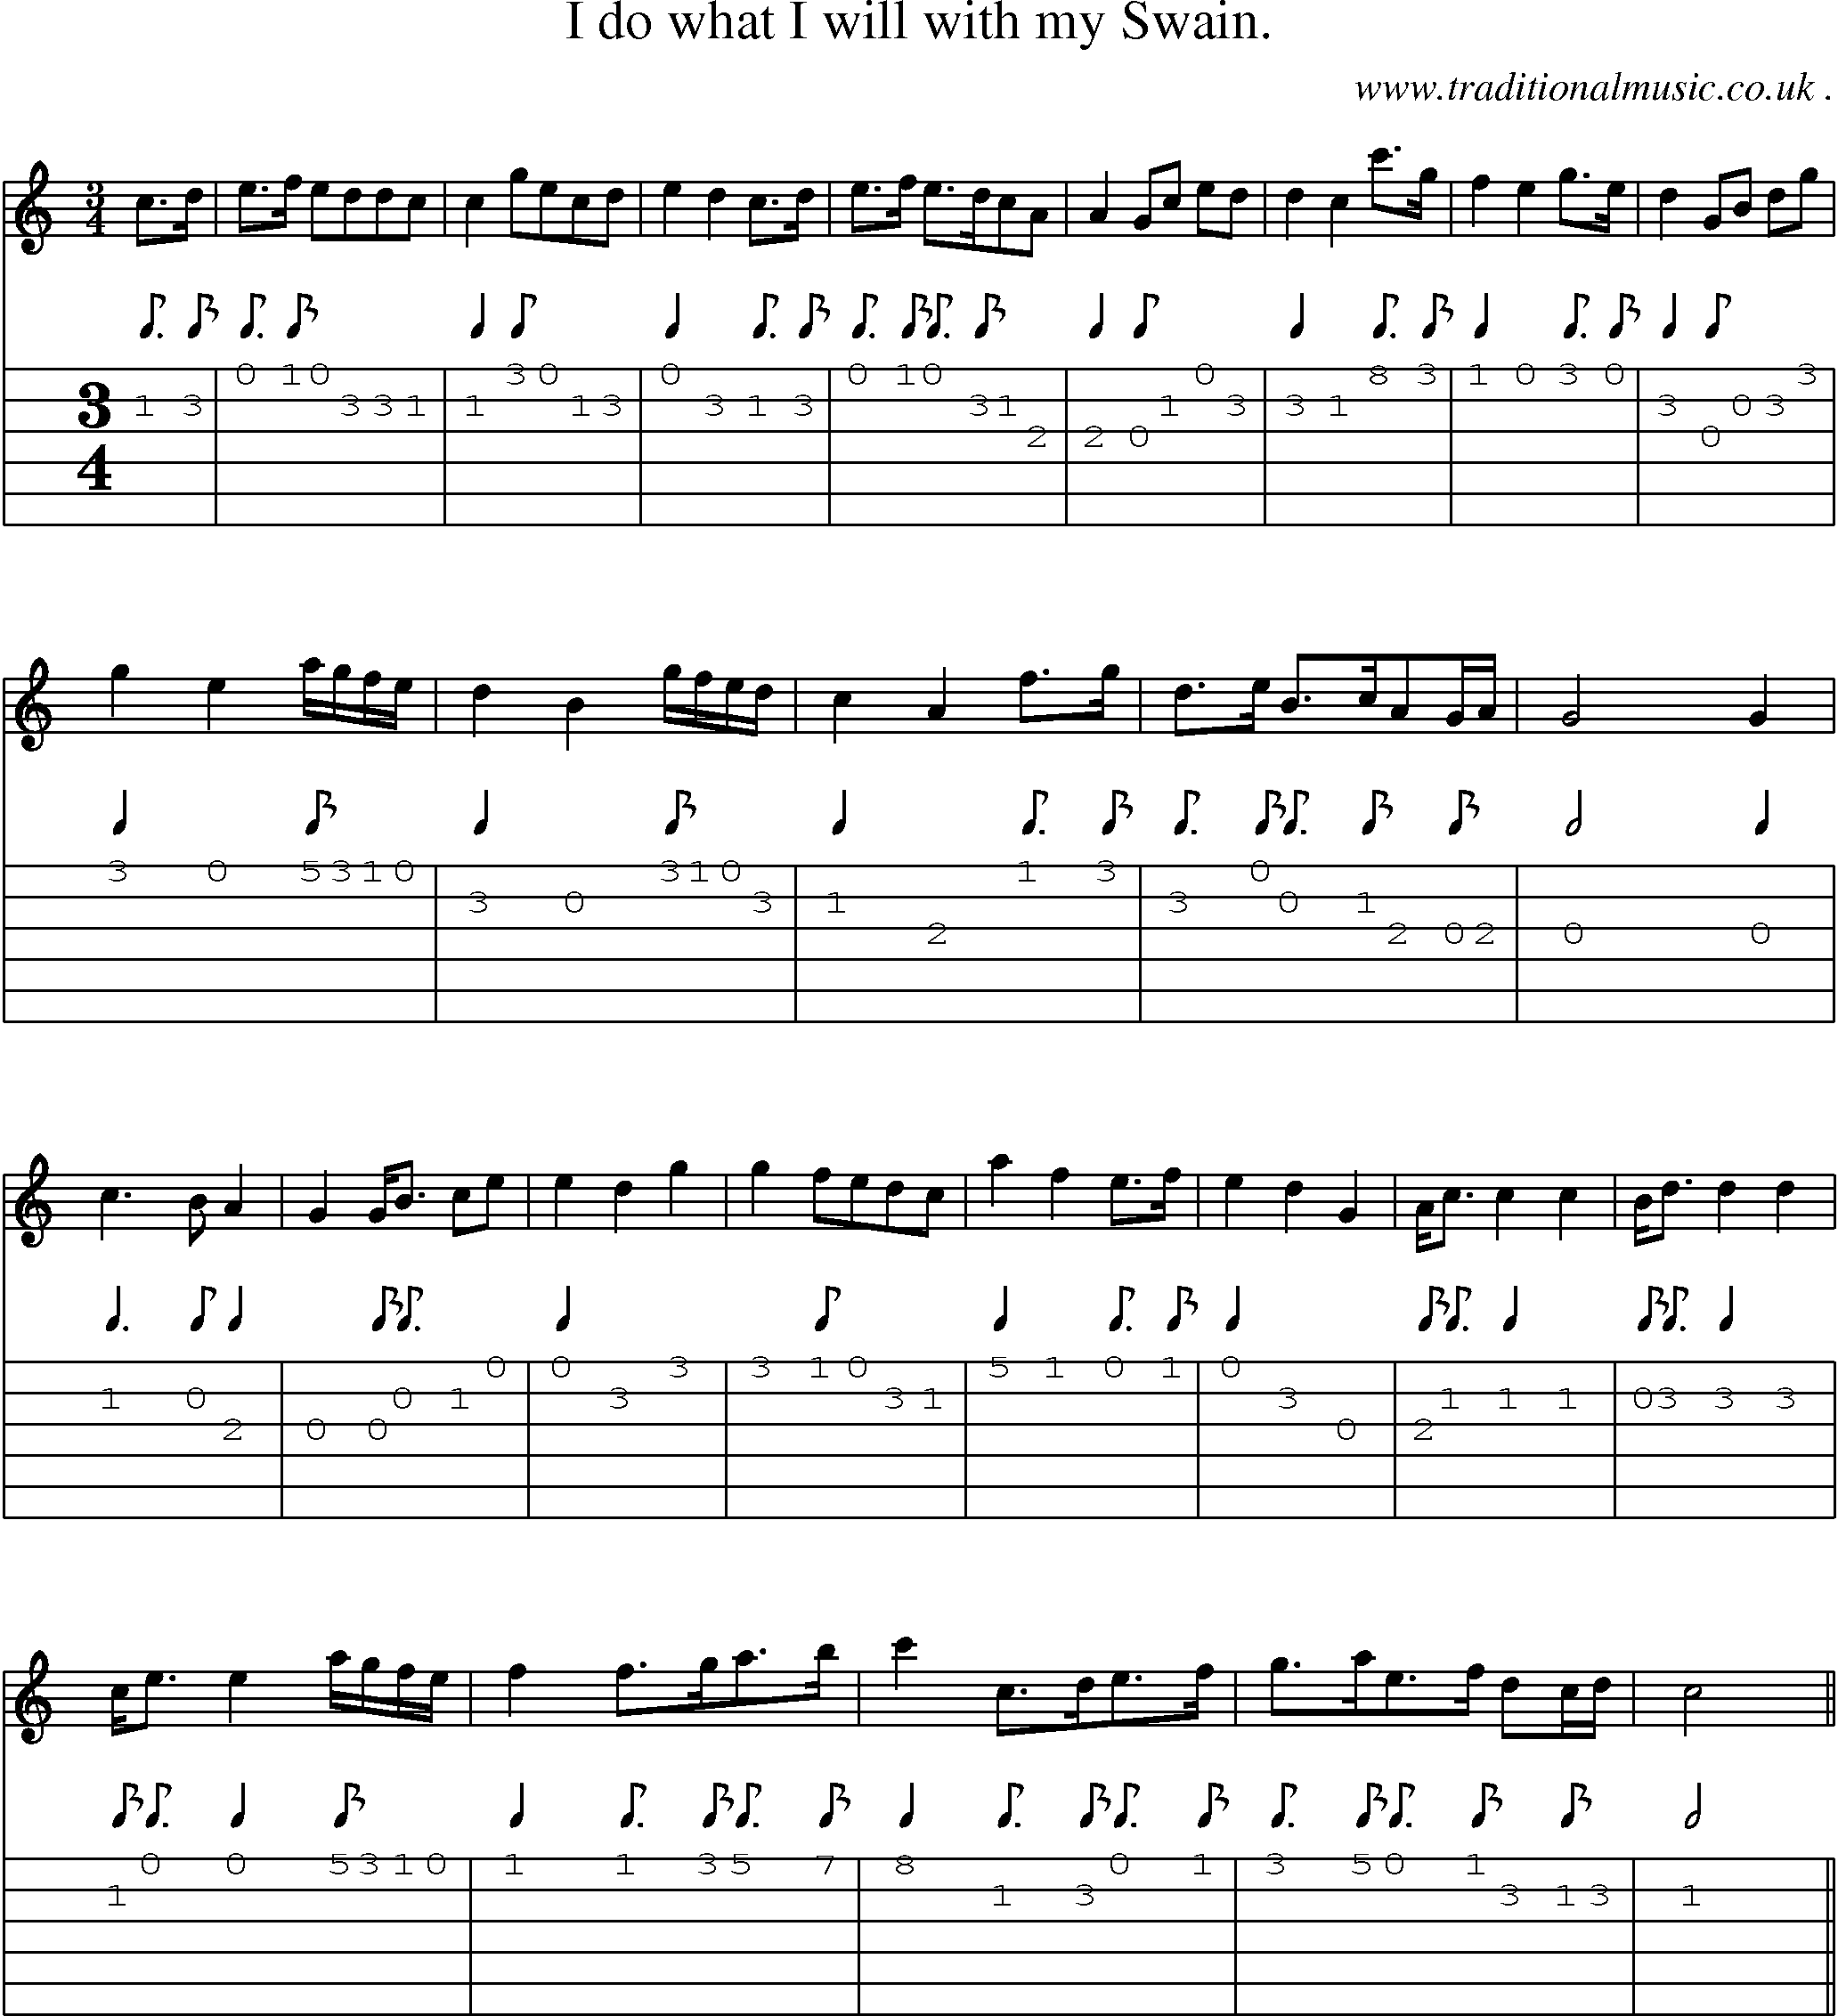 Sheet-Music and Guitar Tabs for I Do What I Will With My Swain